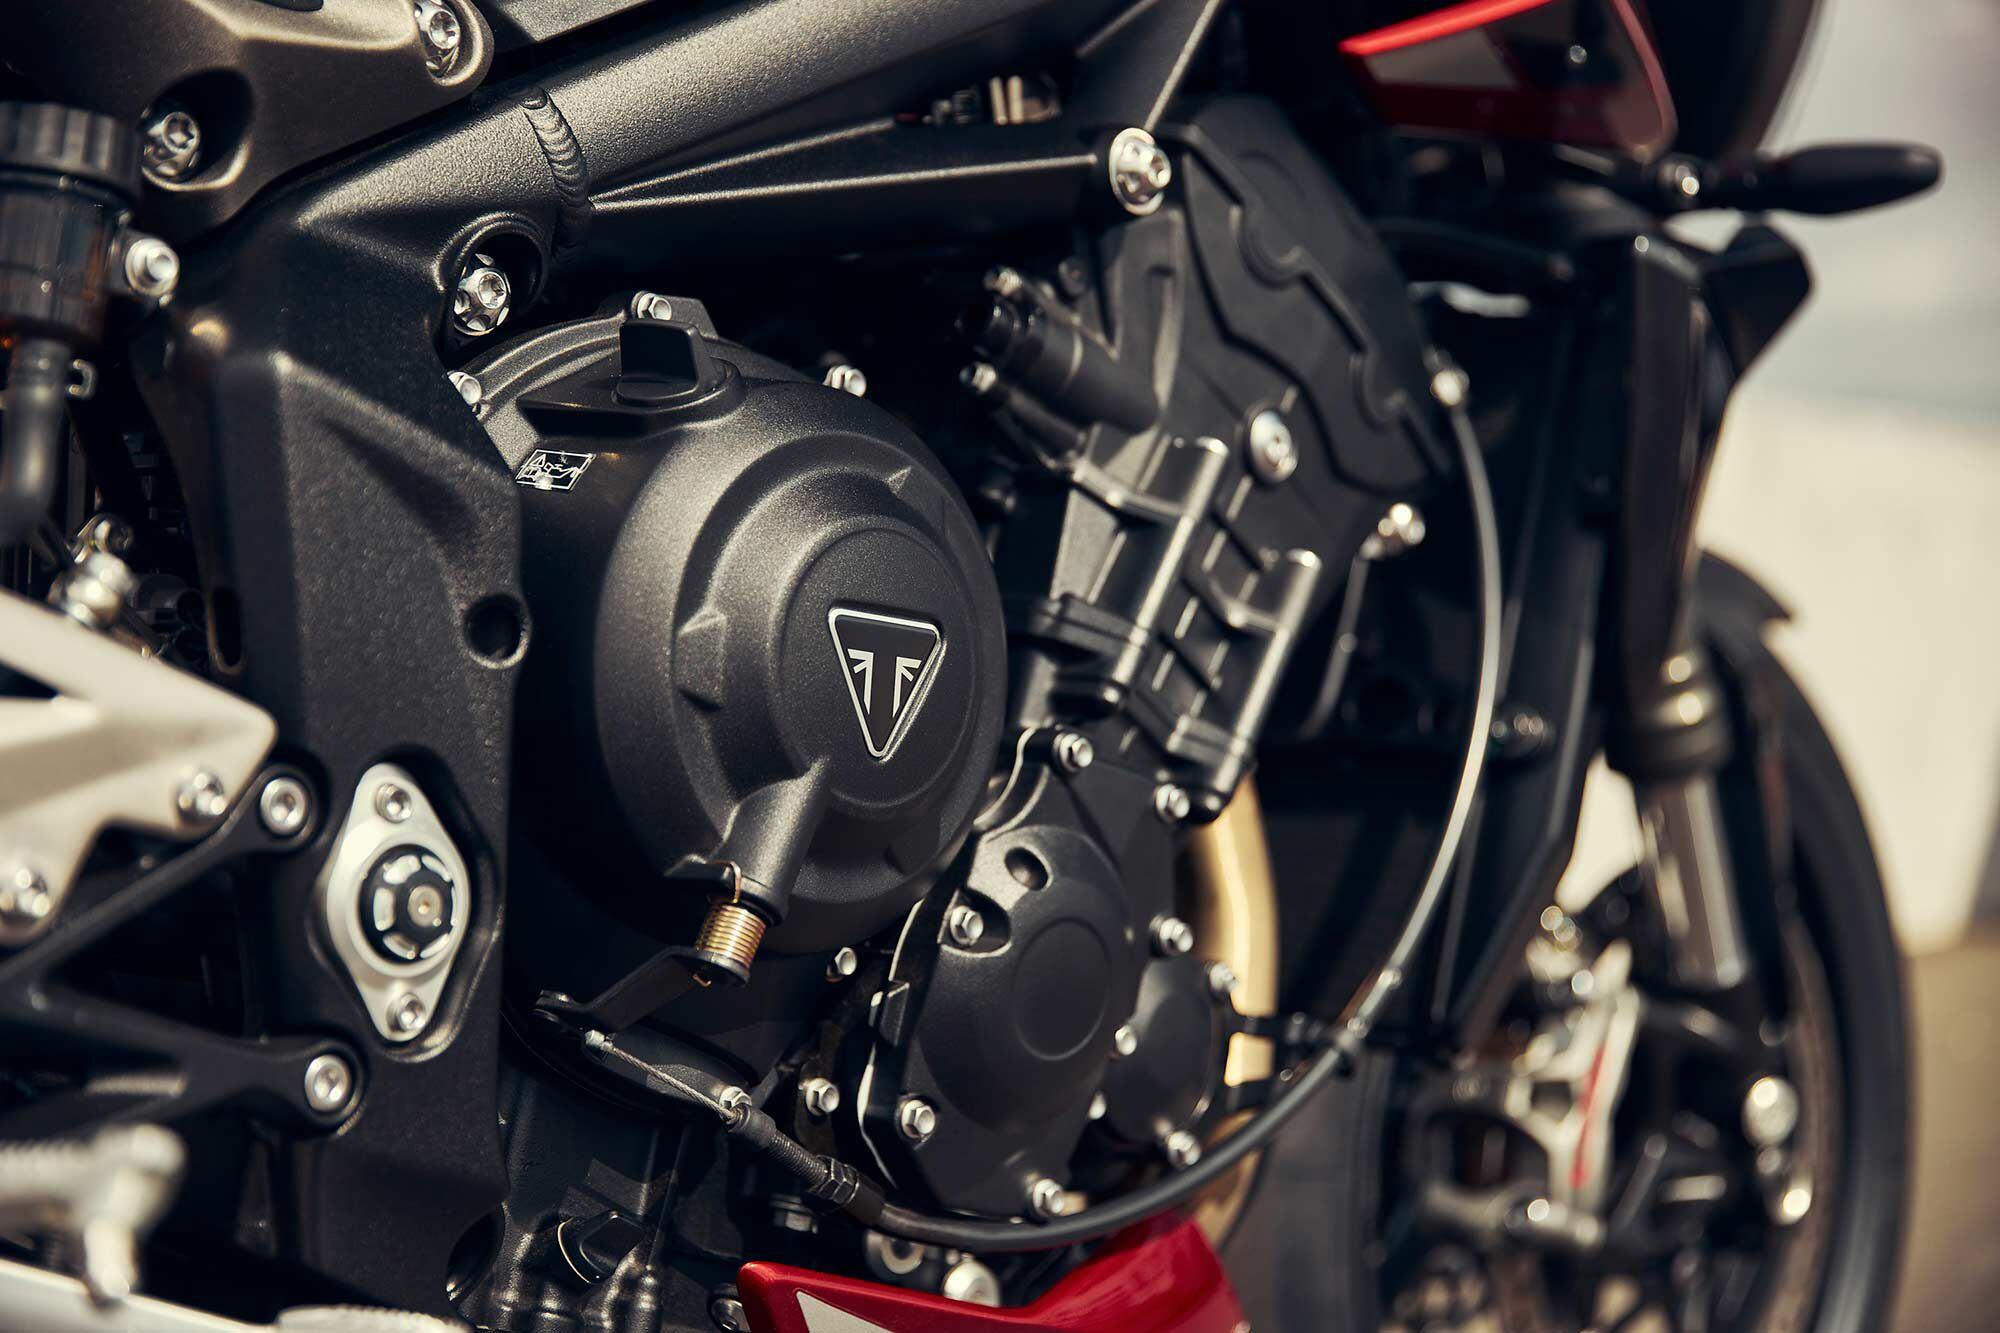 The starboard side of the Street Triple 765 RS, in Carnival Red and Carbon Black.